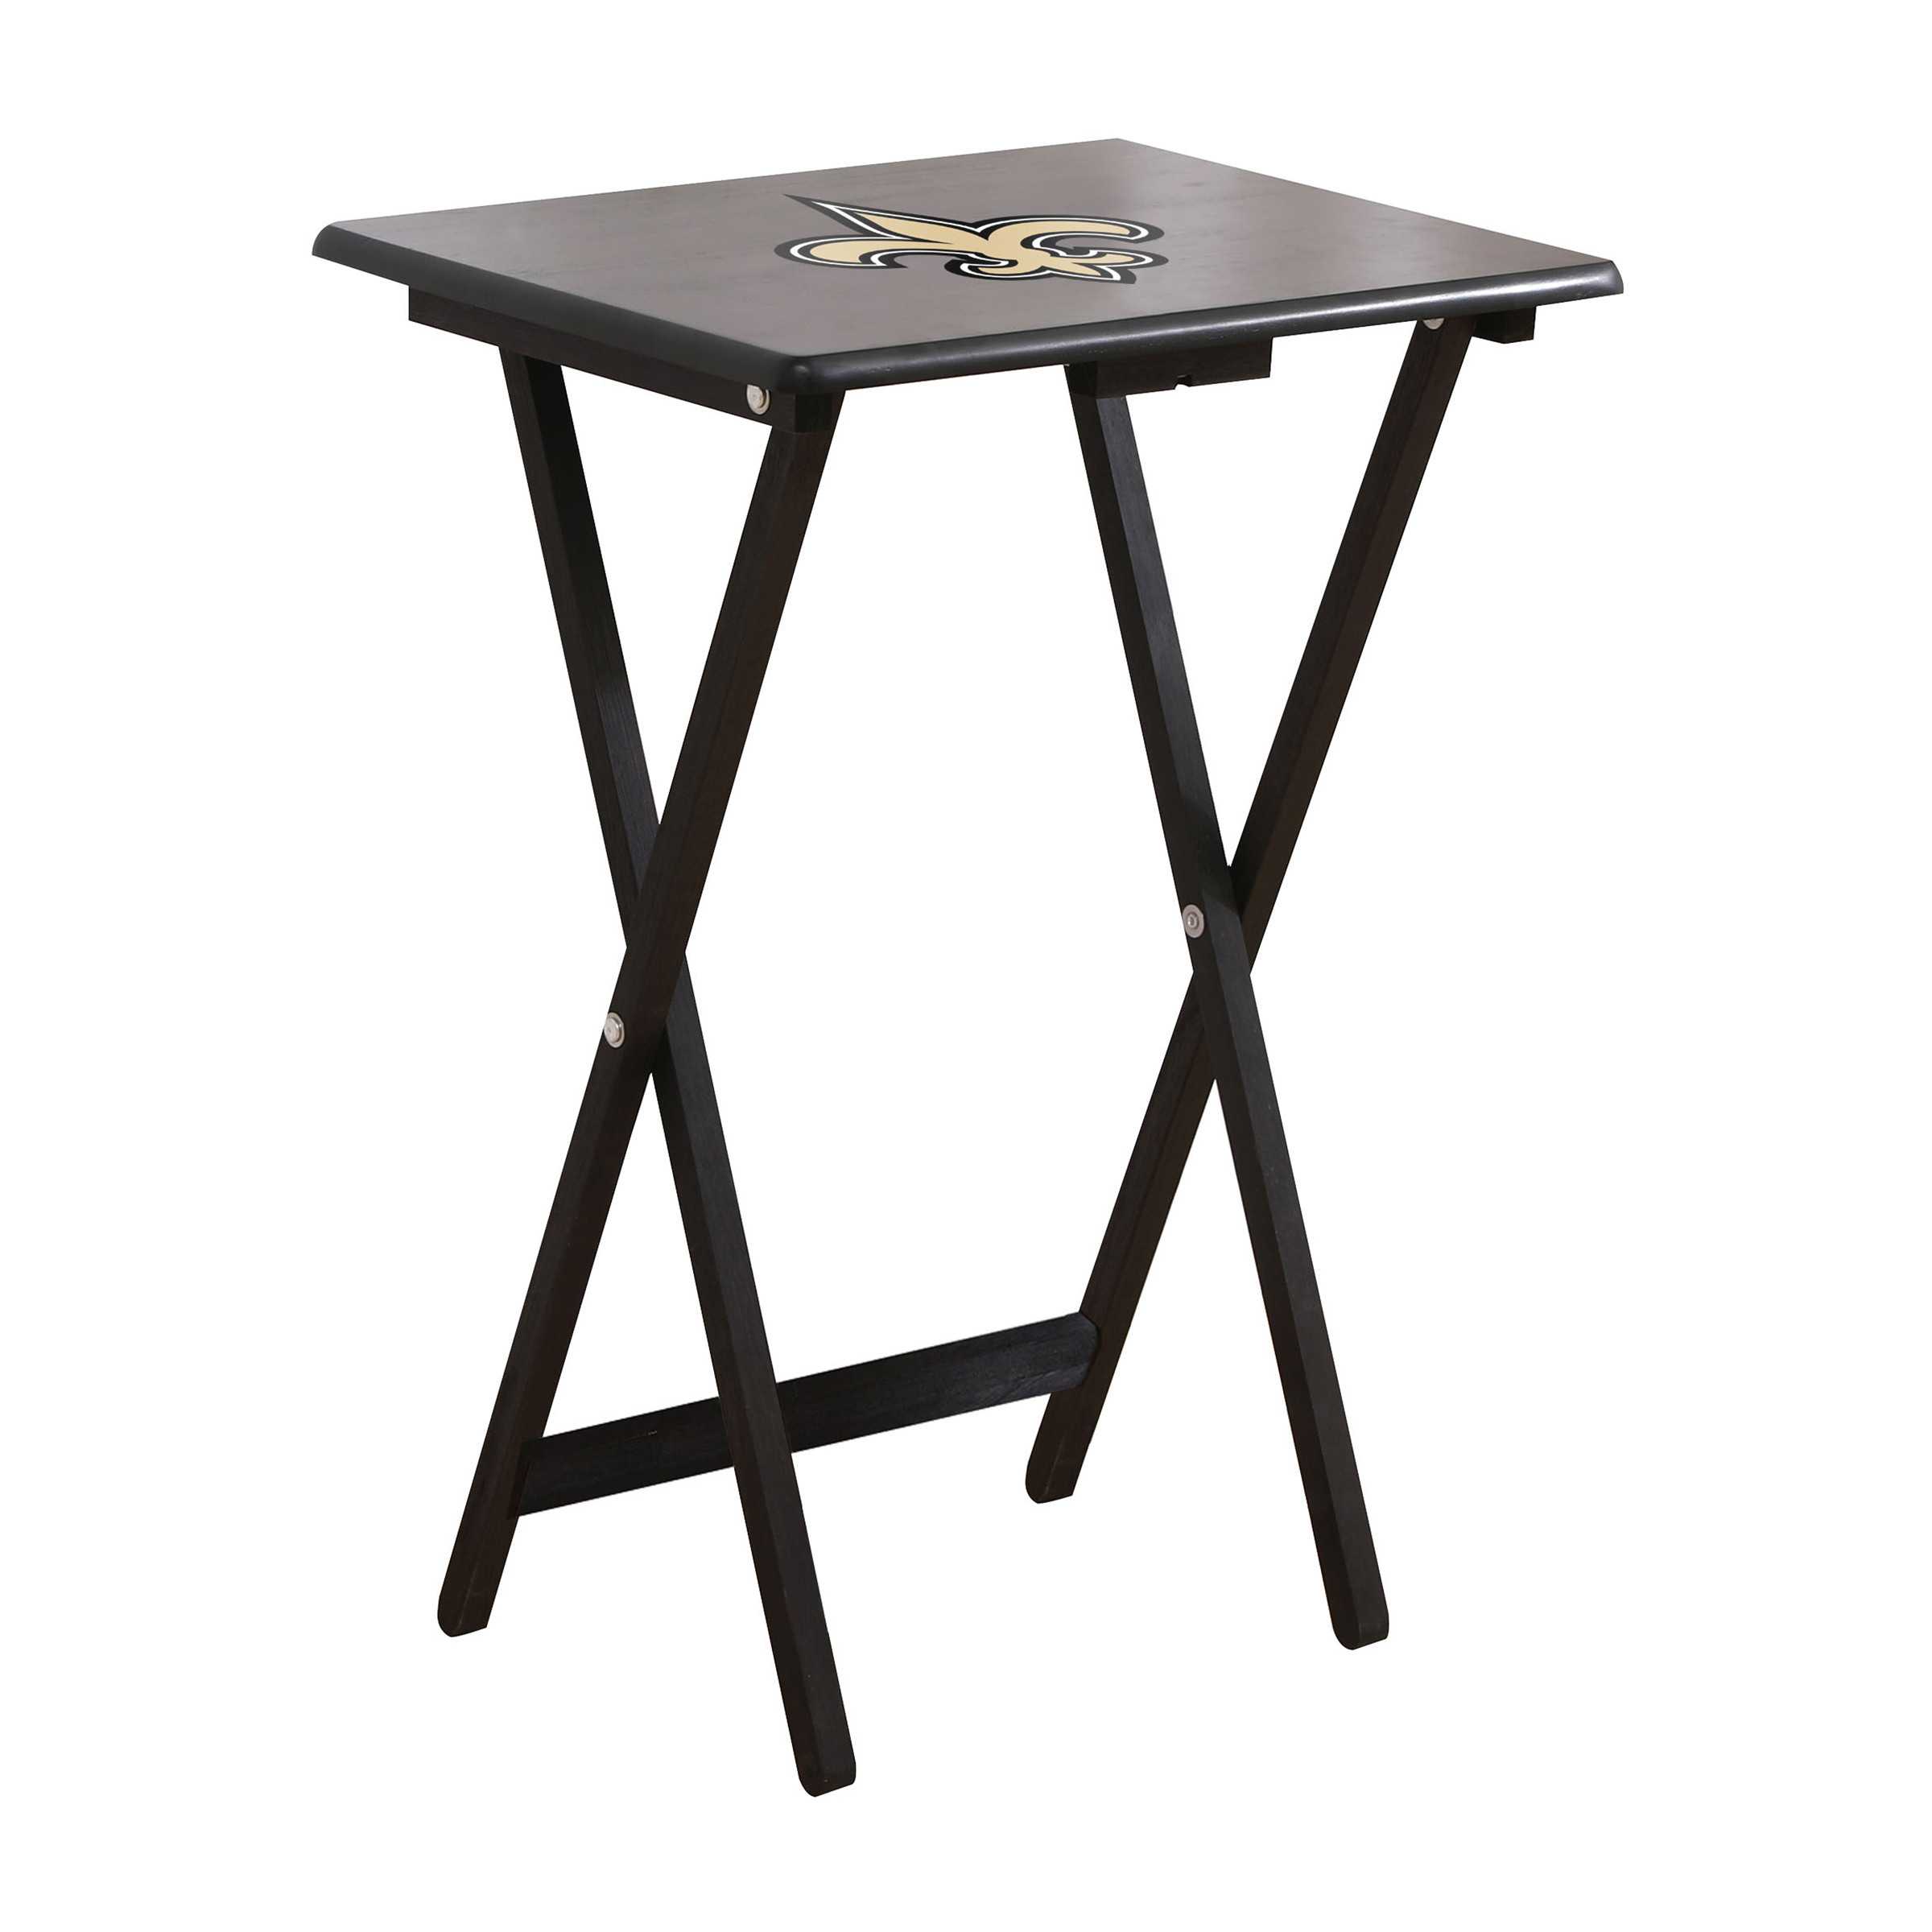 NEW ORLEANS SAINTS 4 TV TRAYS WITH STAND